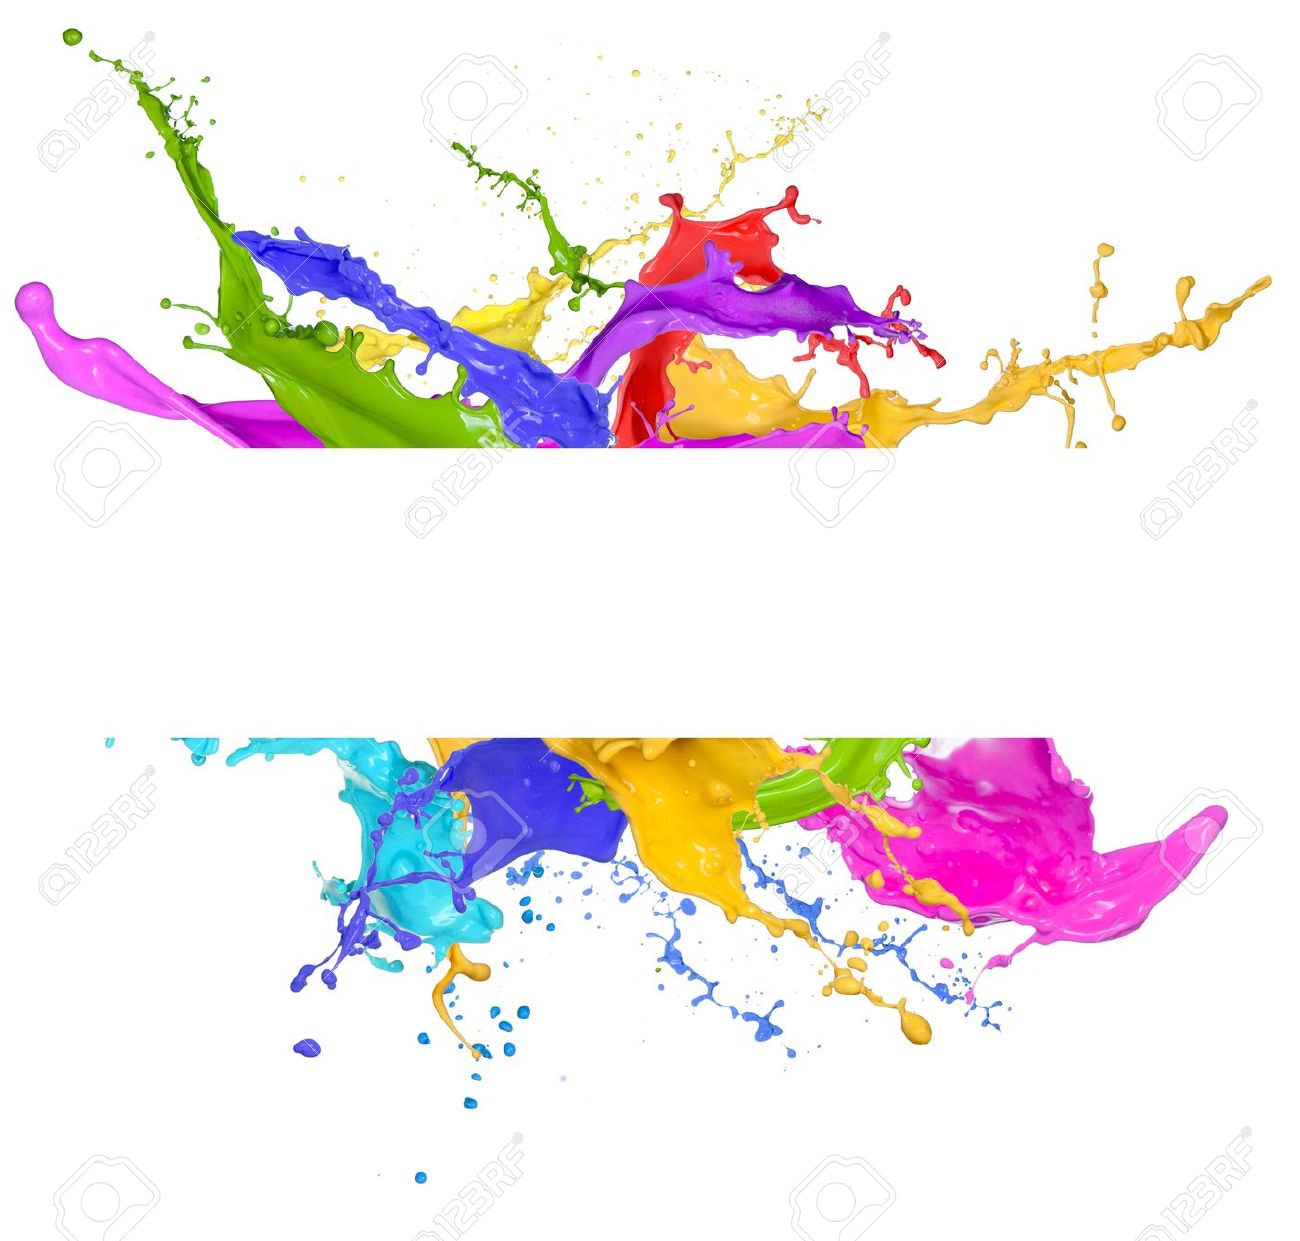 Colored Splashes In Abstract Shape Isolated On White Background